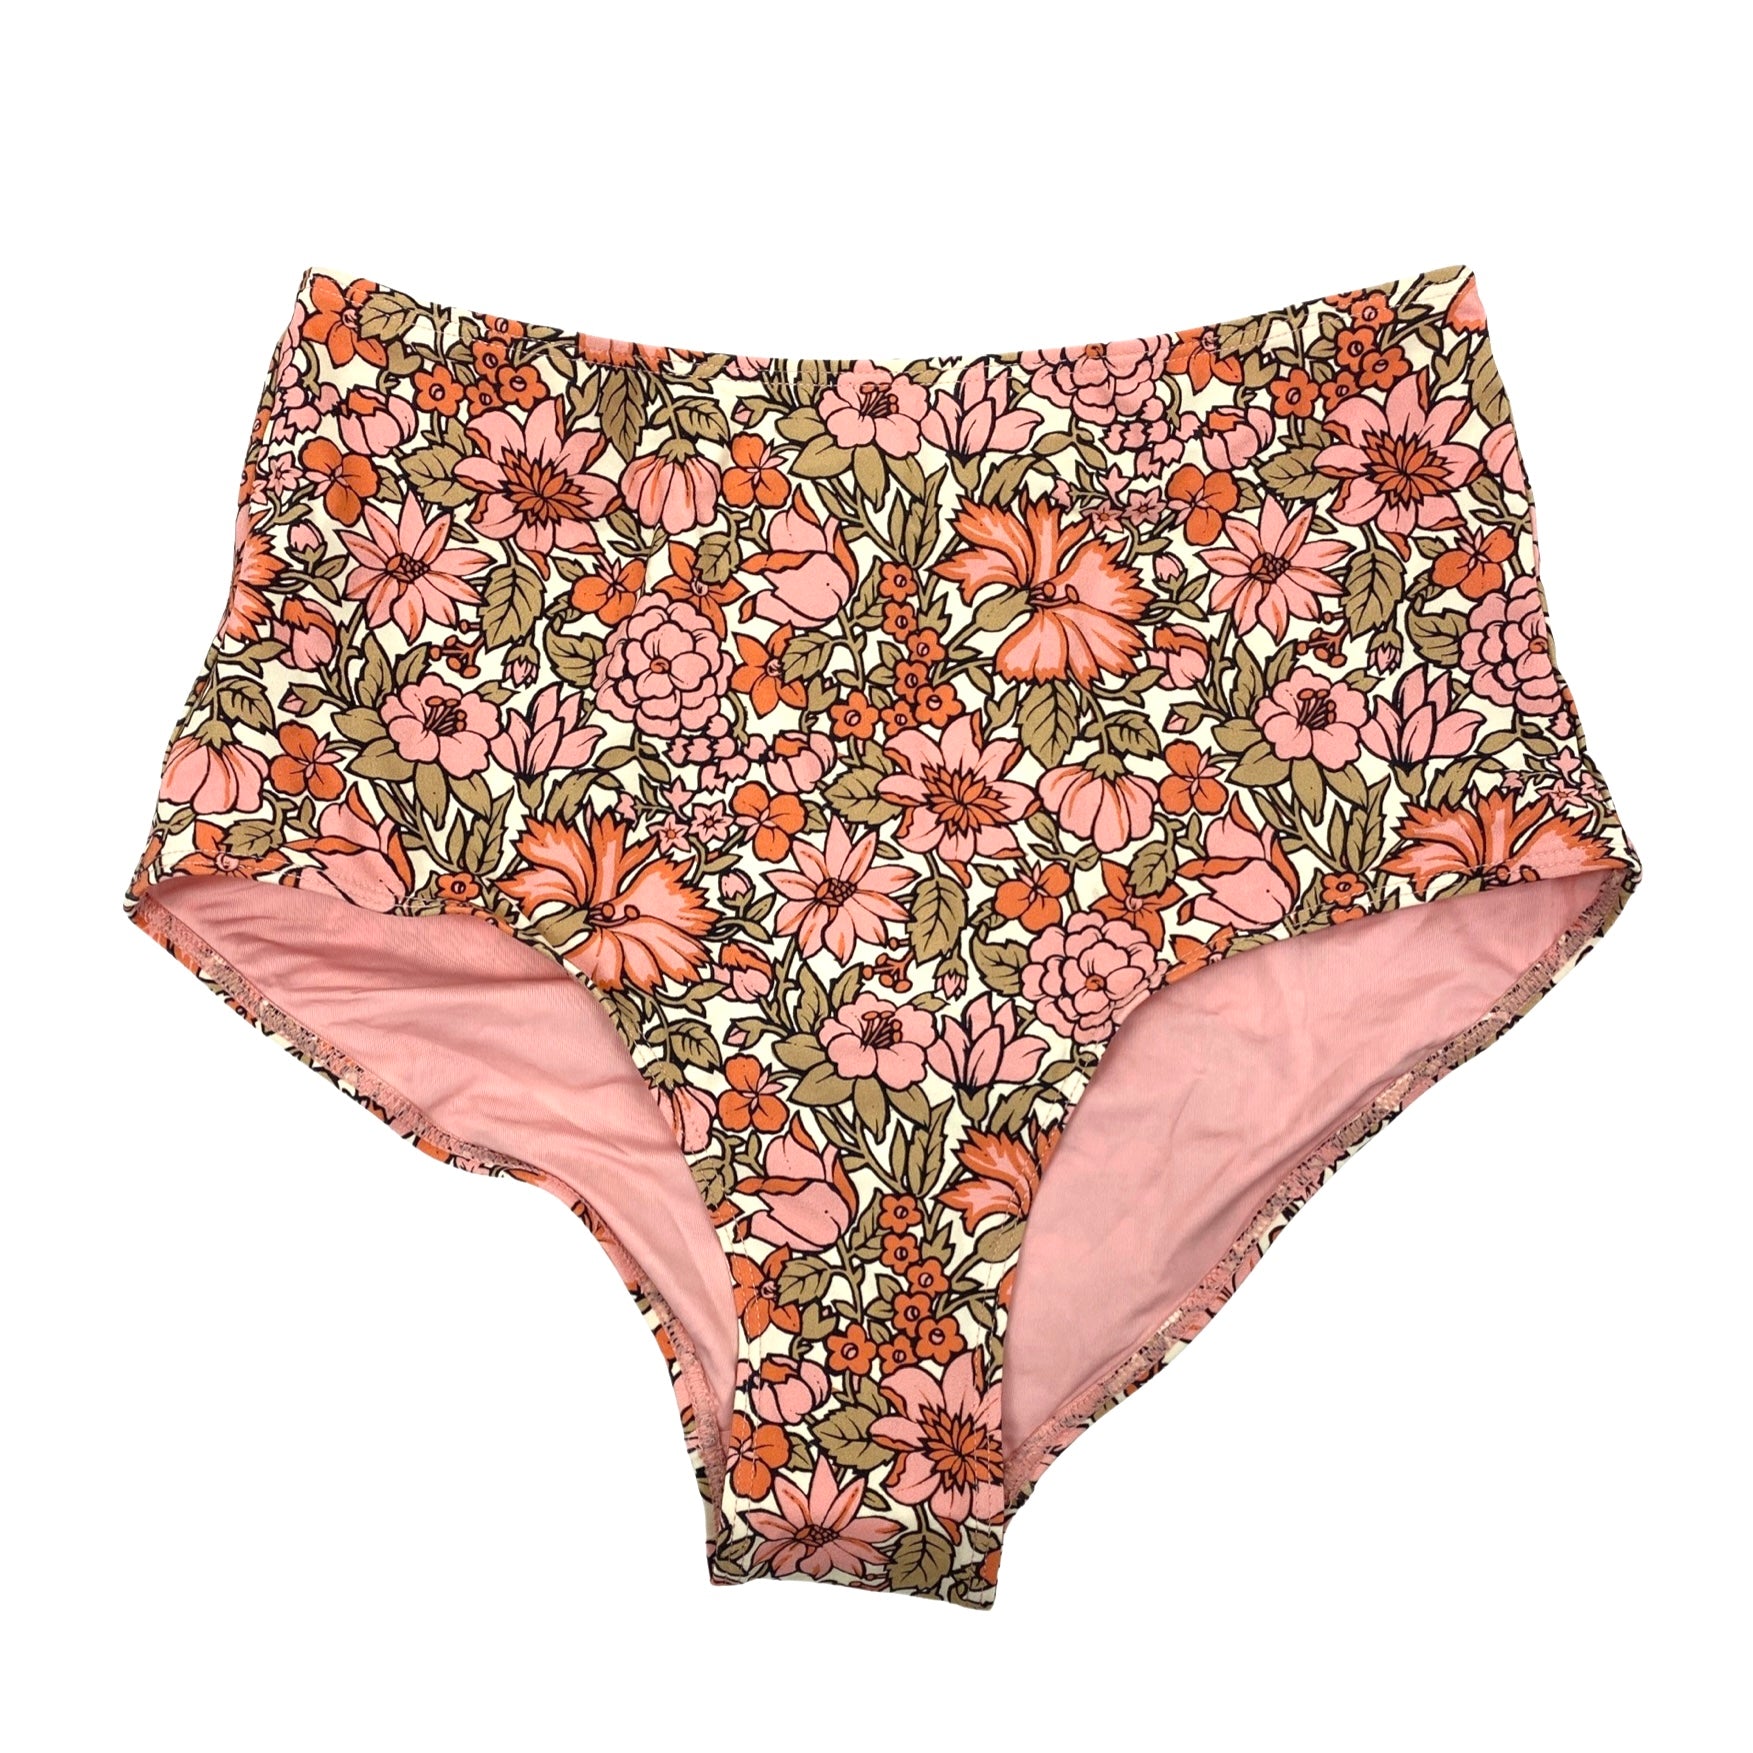 & Other Stories Floral High Rise Bikini Bottoms